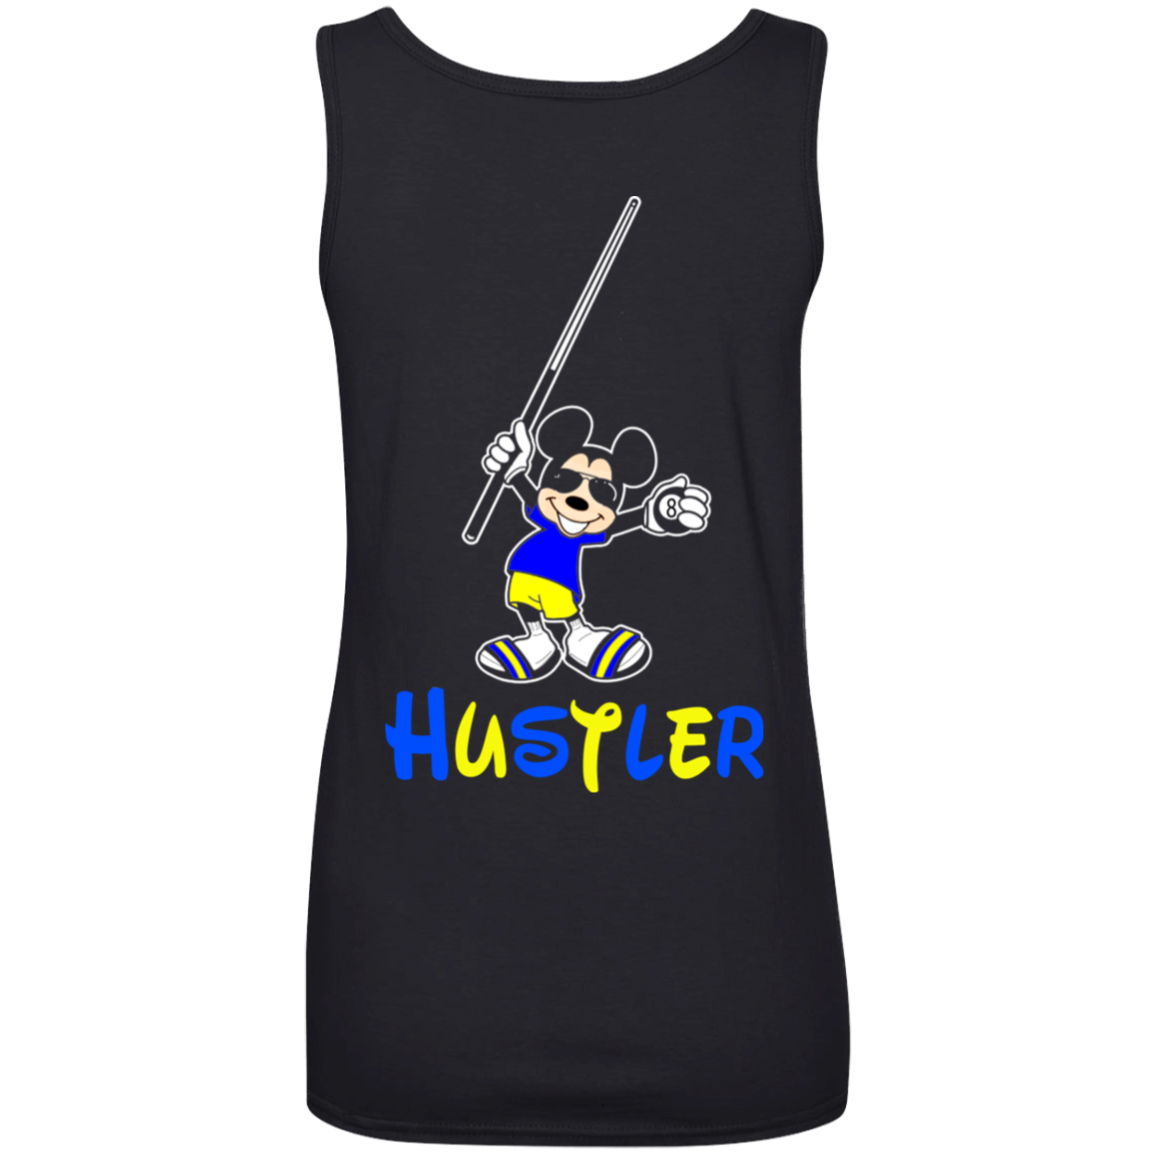 The GHOATS Custom Design #20. Look at the back. Hustle Mouse. Mickey Mouse Fan Art. Ladies' 100% Ringspun Cotton Tank Top